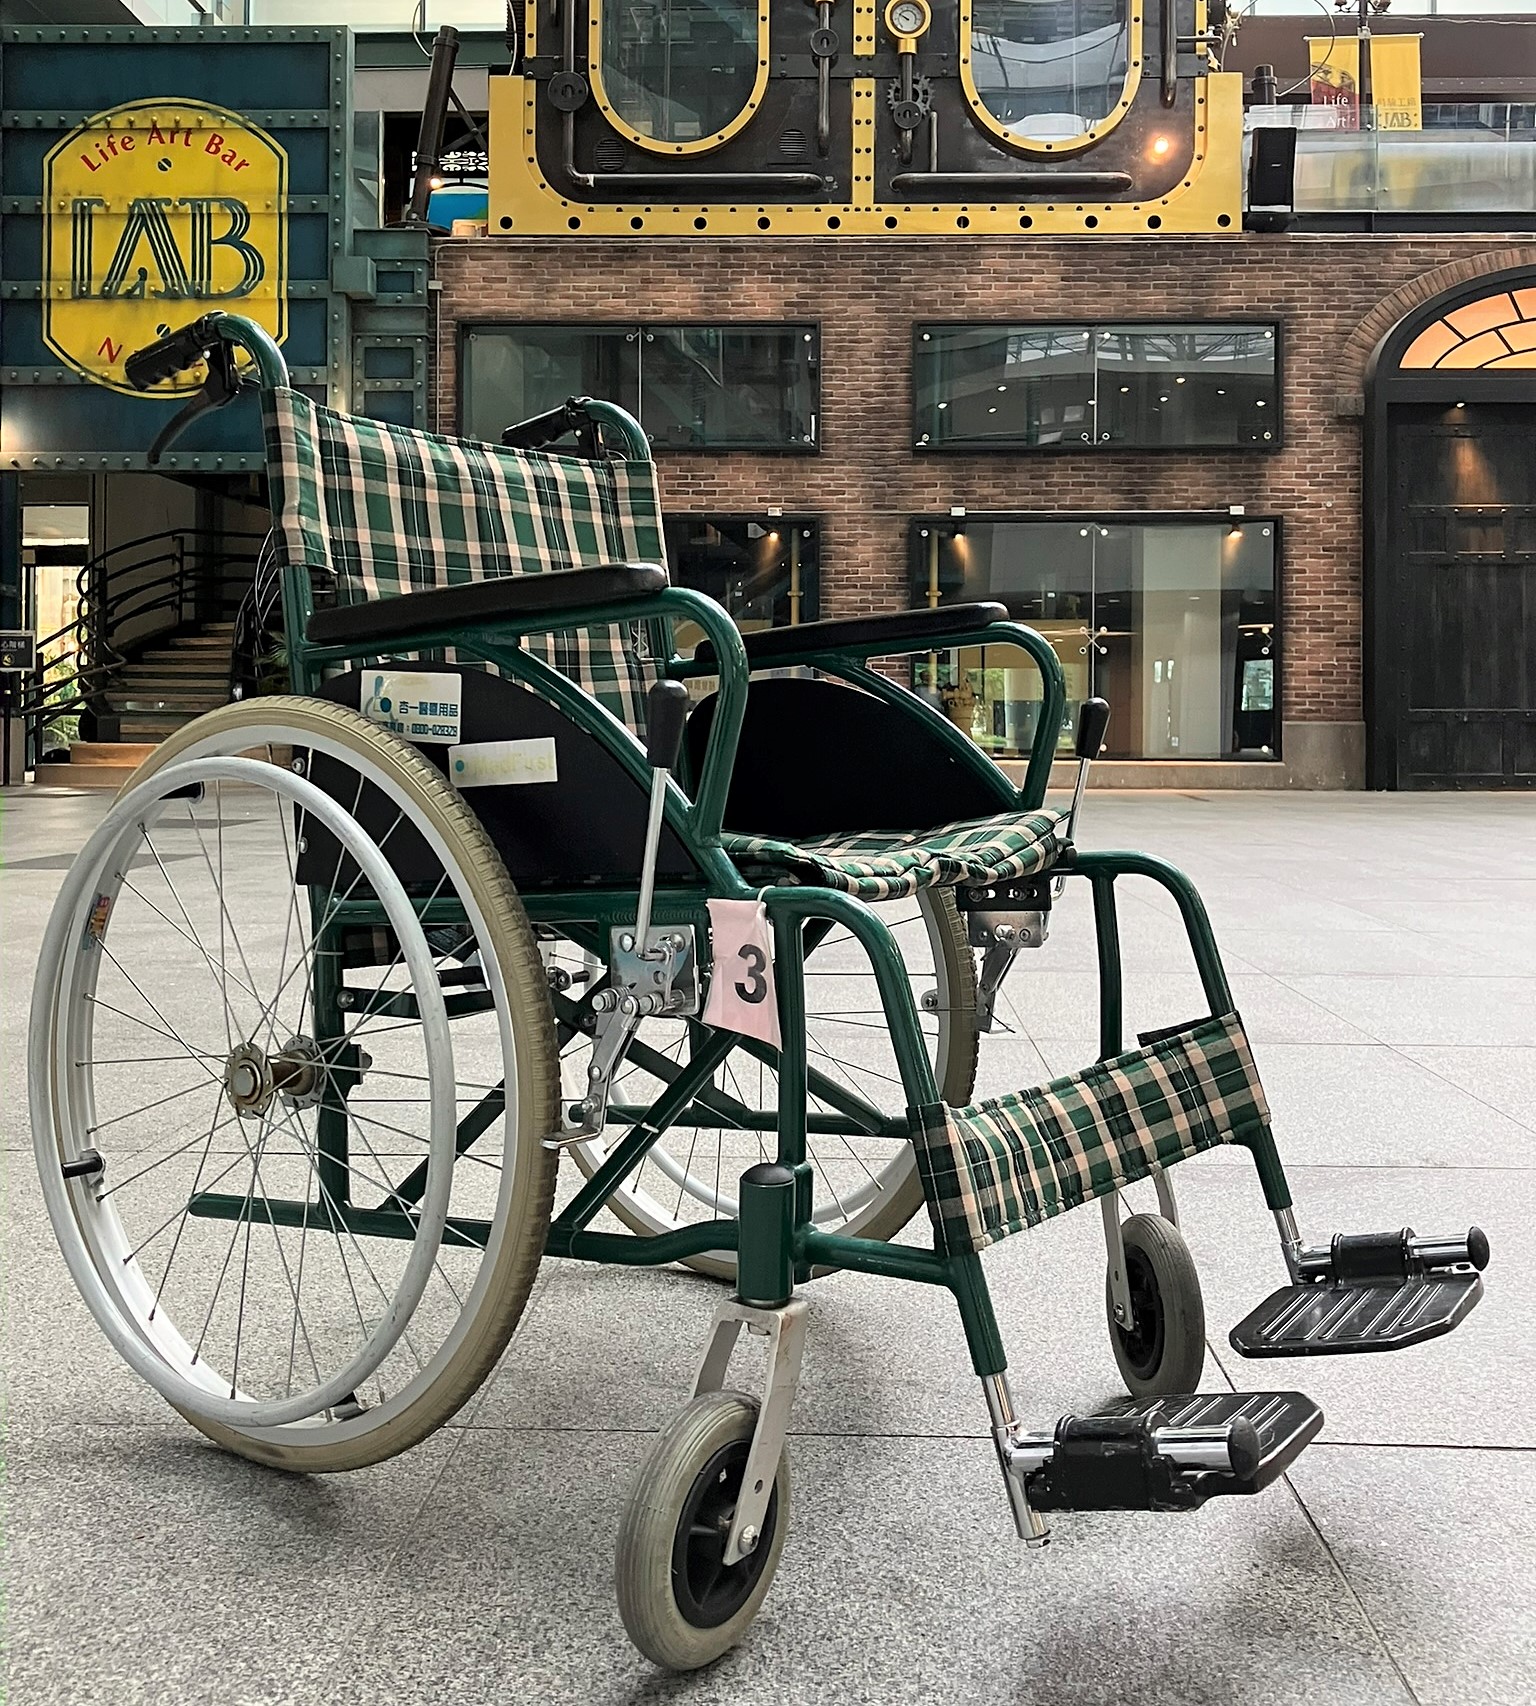 Free-to-Use wheelchair & baby cart